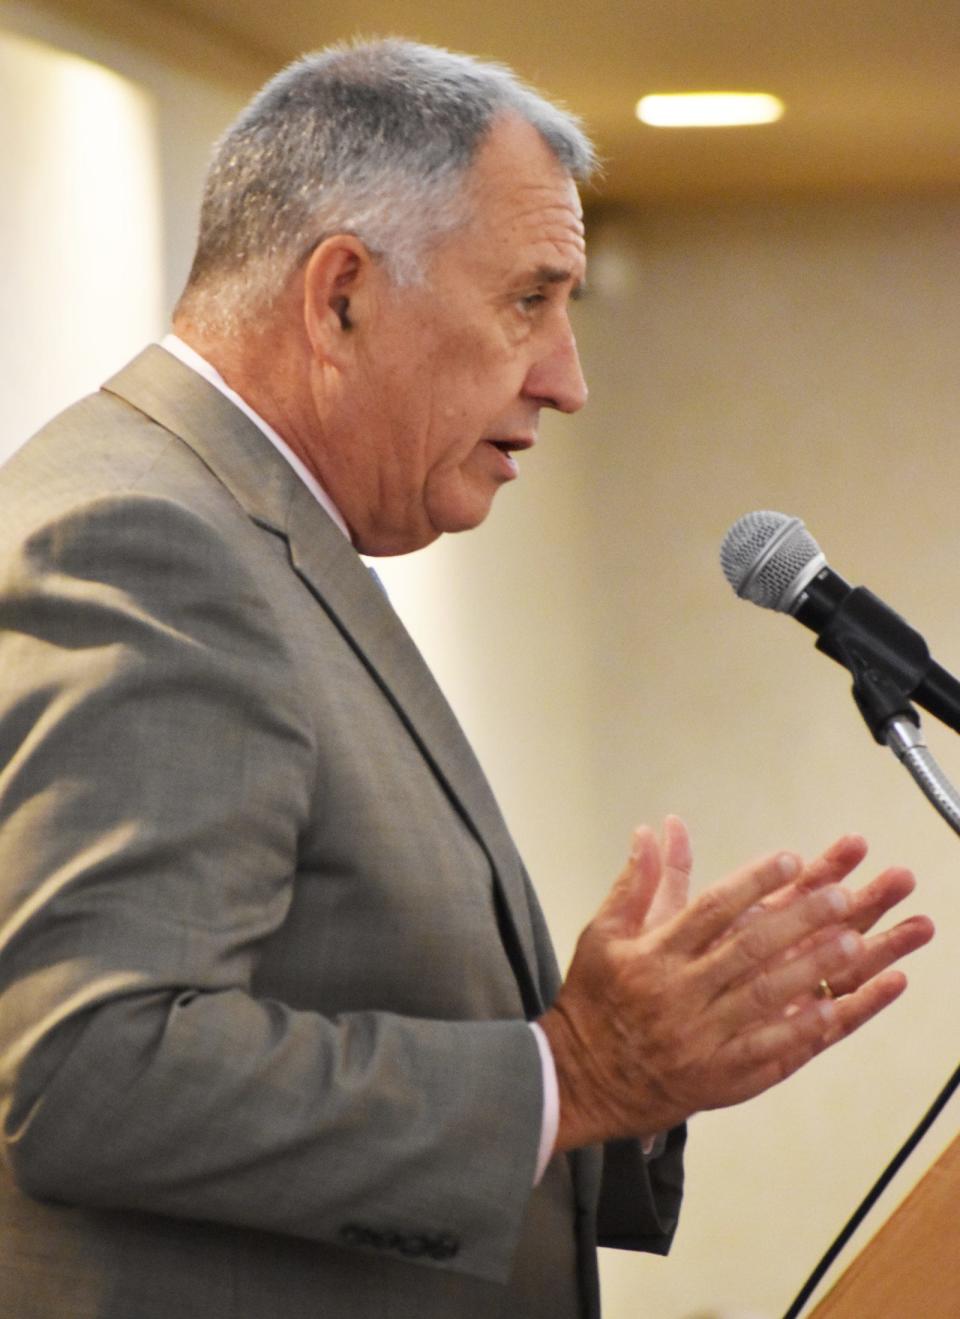 Bristol County District Attorney Thomas M. Quinn III speaks to a crowd at his annual Bristol County Celebration of Seniors conference, which includes speakers and a resource fair.